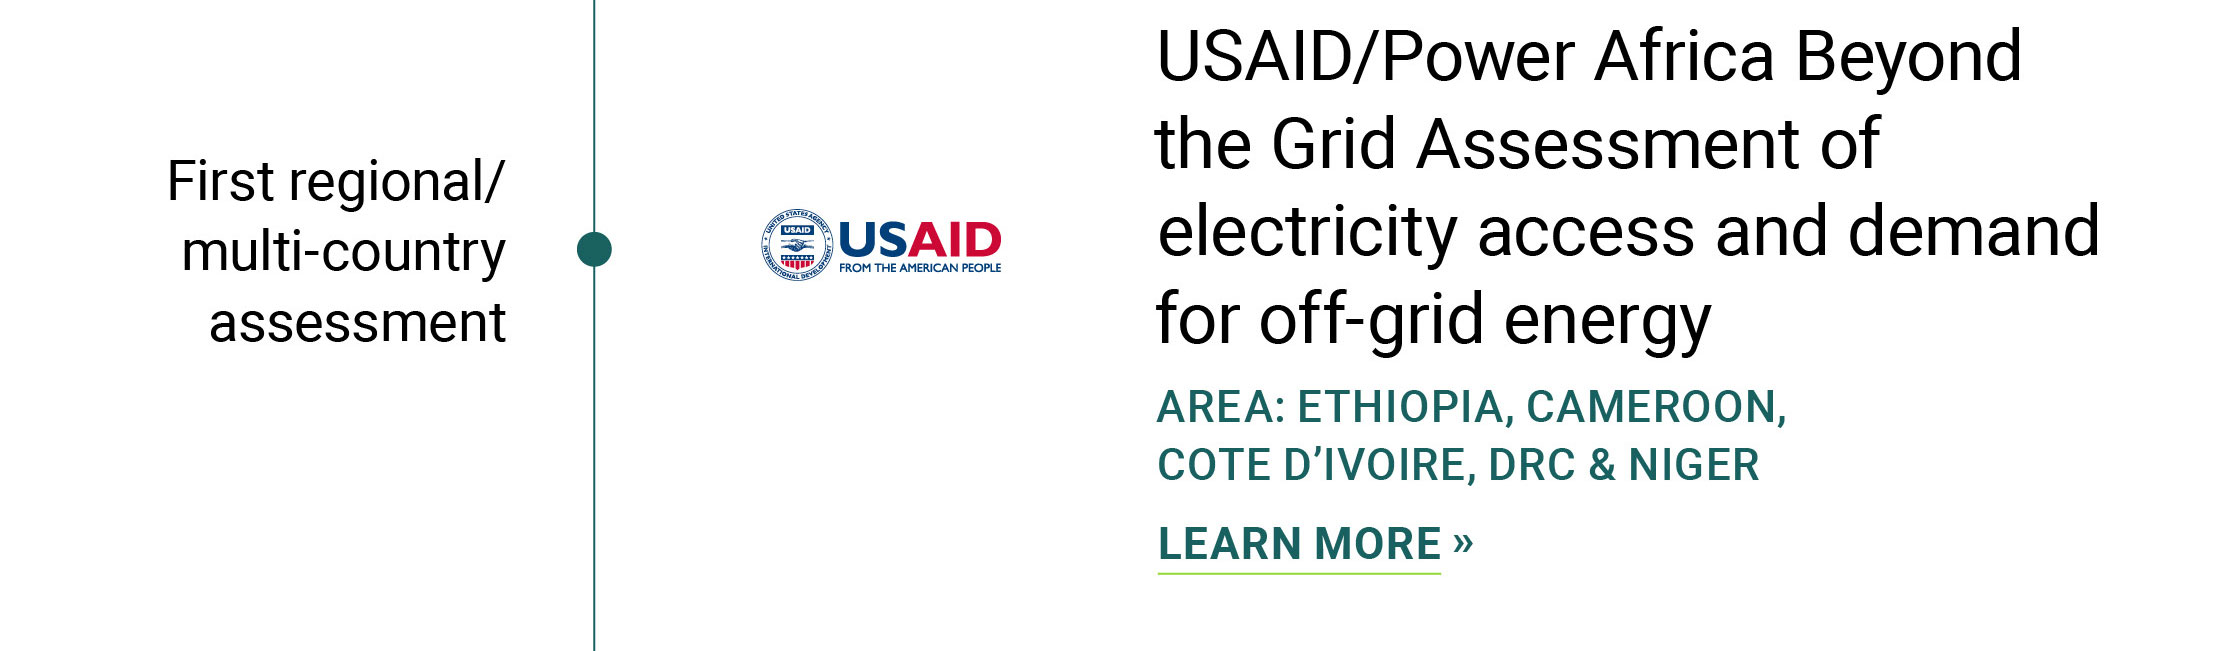 May 2019 USAID Power Africa Beyond the Grid, Assessment of electricity access and demand for off-grid energy in 5 target countries RTI for USAID Ethiopia, Cameroon, Cote d’Ivoire, DRC and Niger   First regional/multi country assessment  